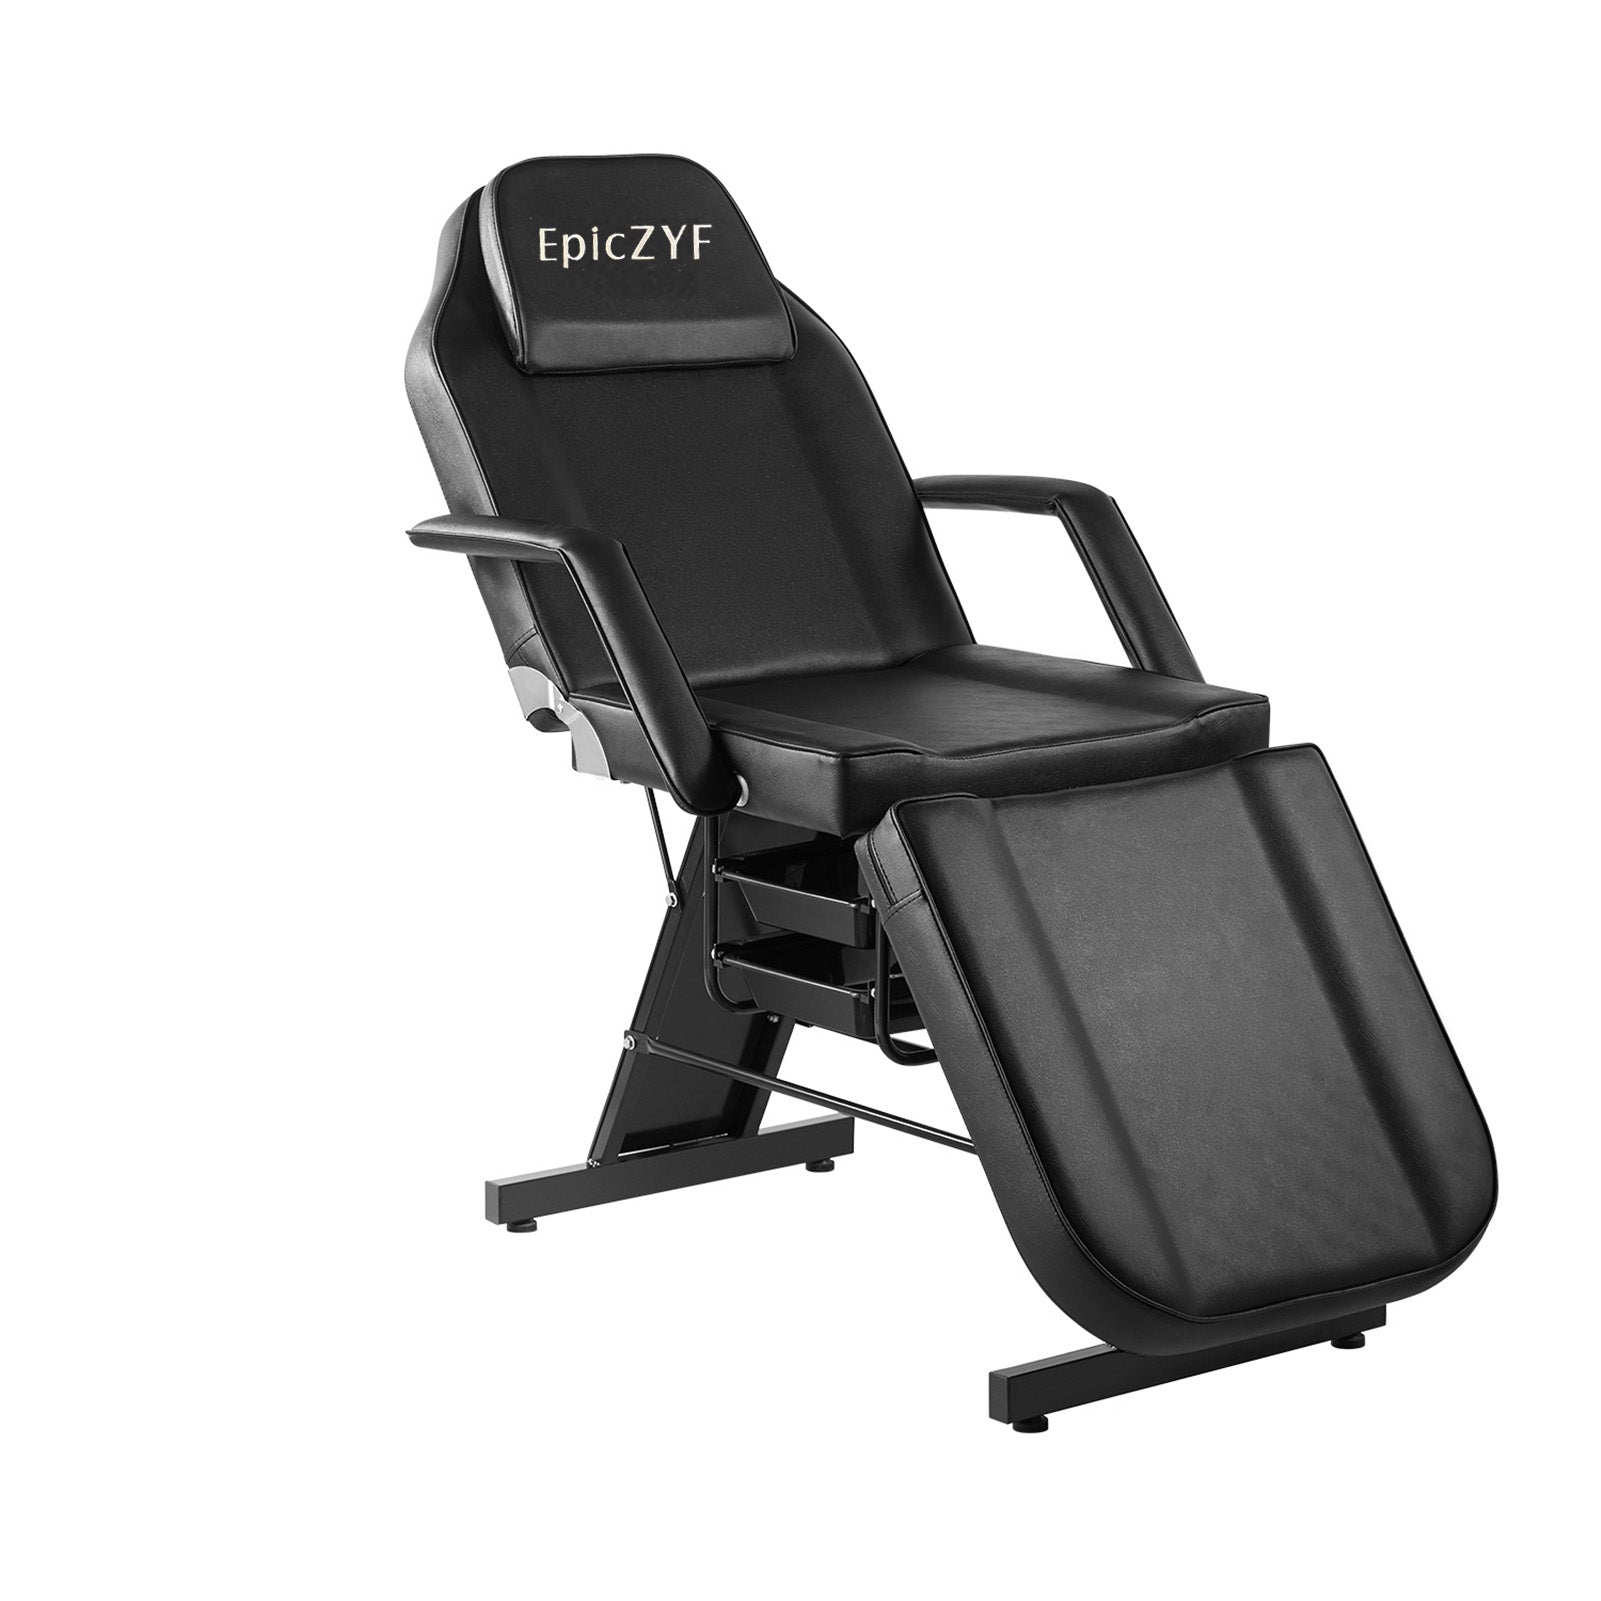 EpicZYF Facial Chair, Tattoo Bed with Hydraulic Stool for Professional Massage